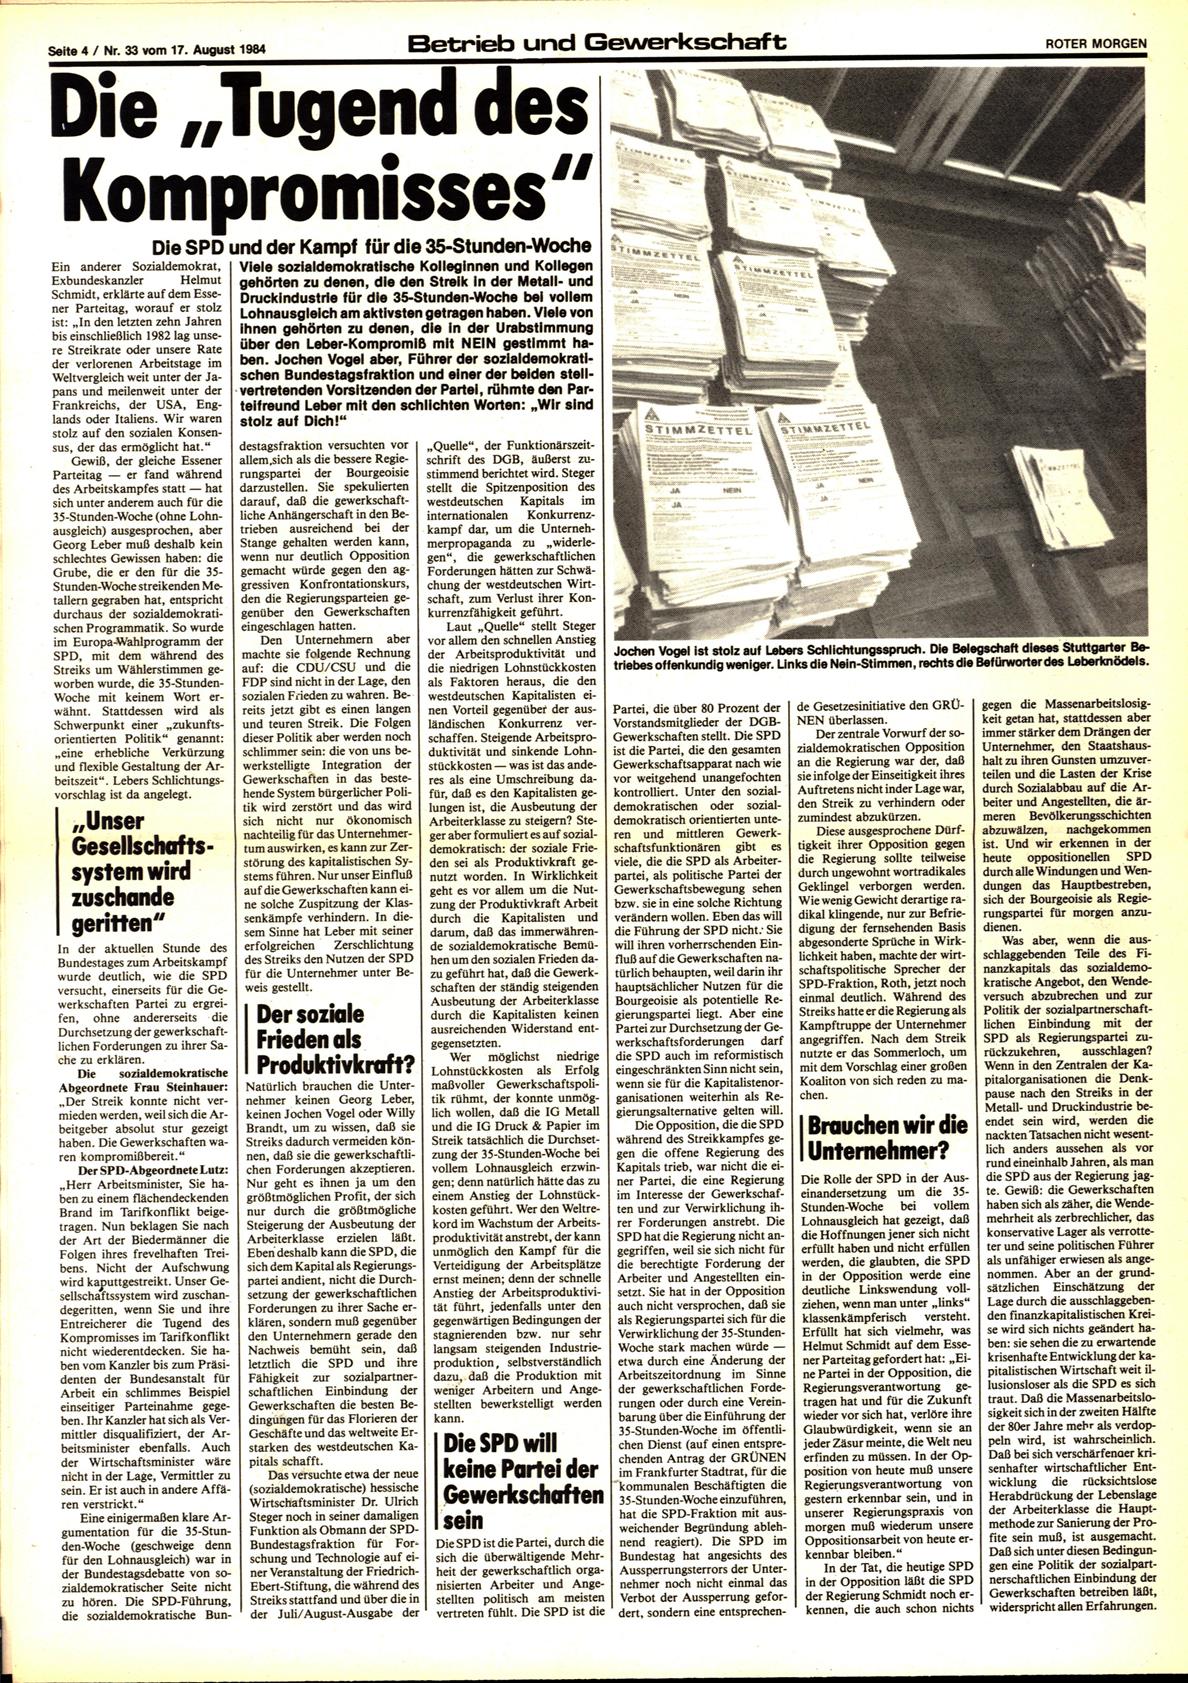 Roter Morgen, 18. Jg., 17. August 1984, Nr. 33, Seite 4